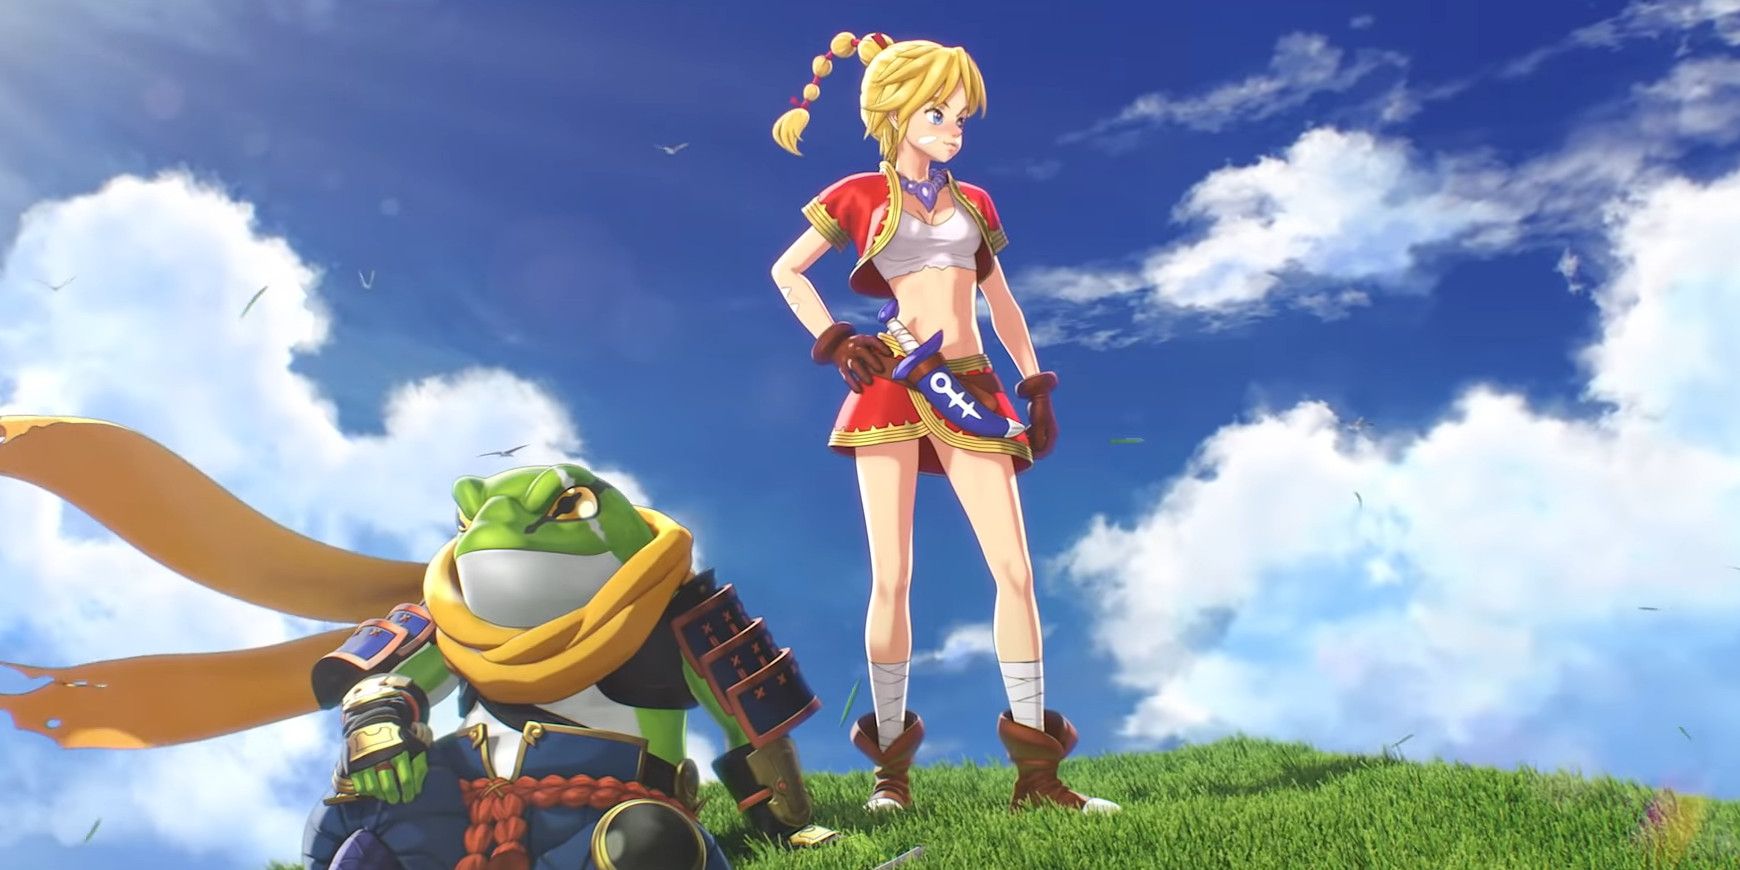 Slideshow: Chrono Cross x Another Eden Crossover Character Art